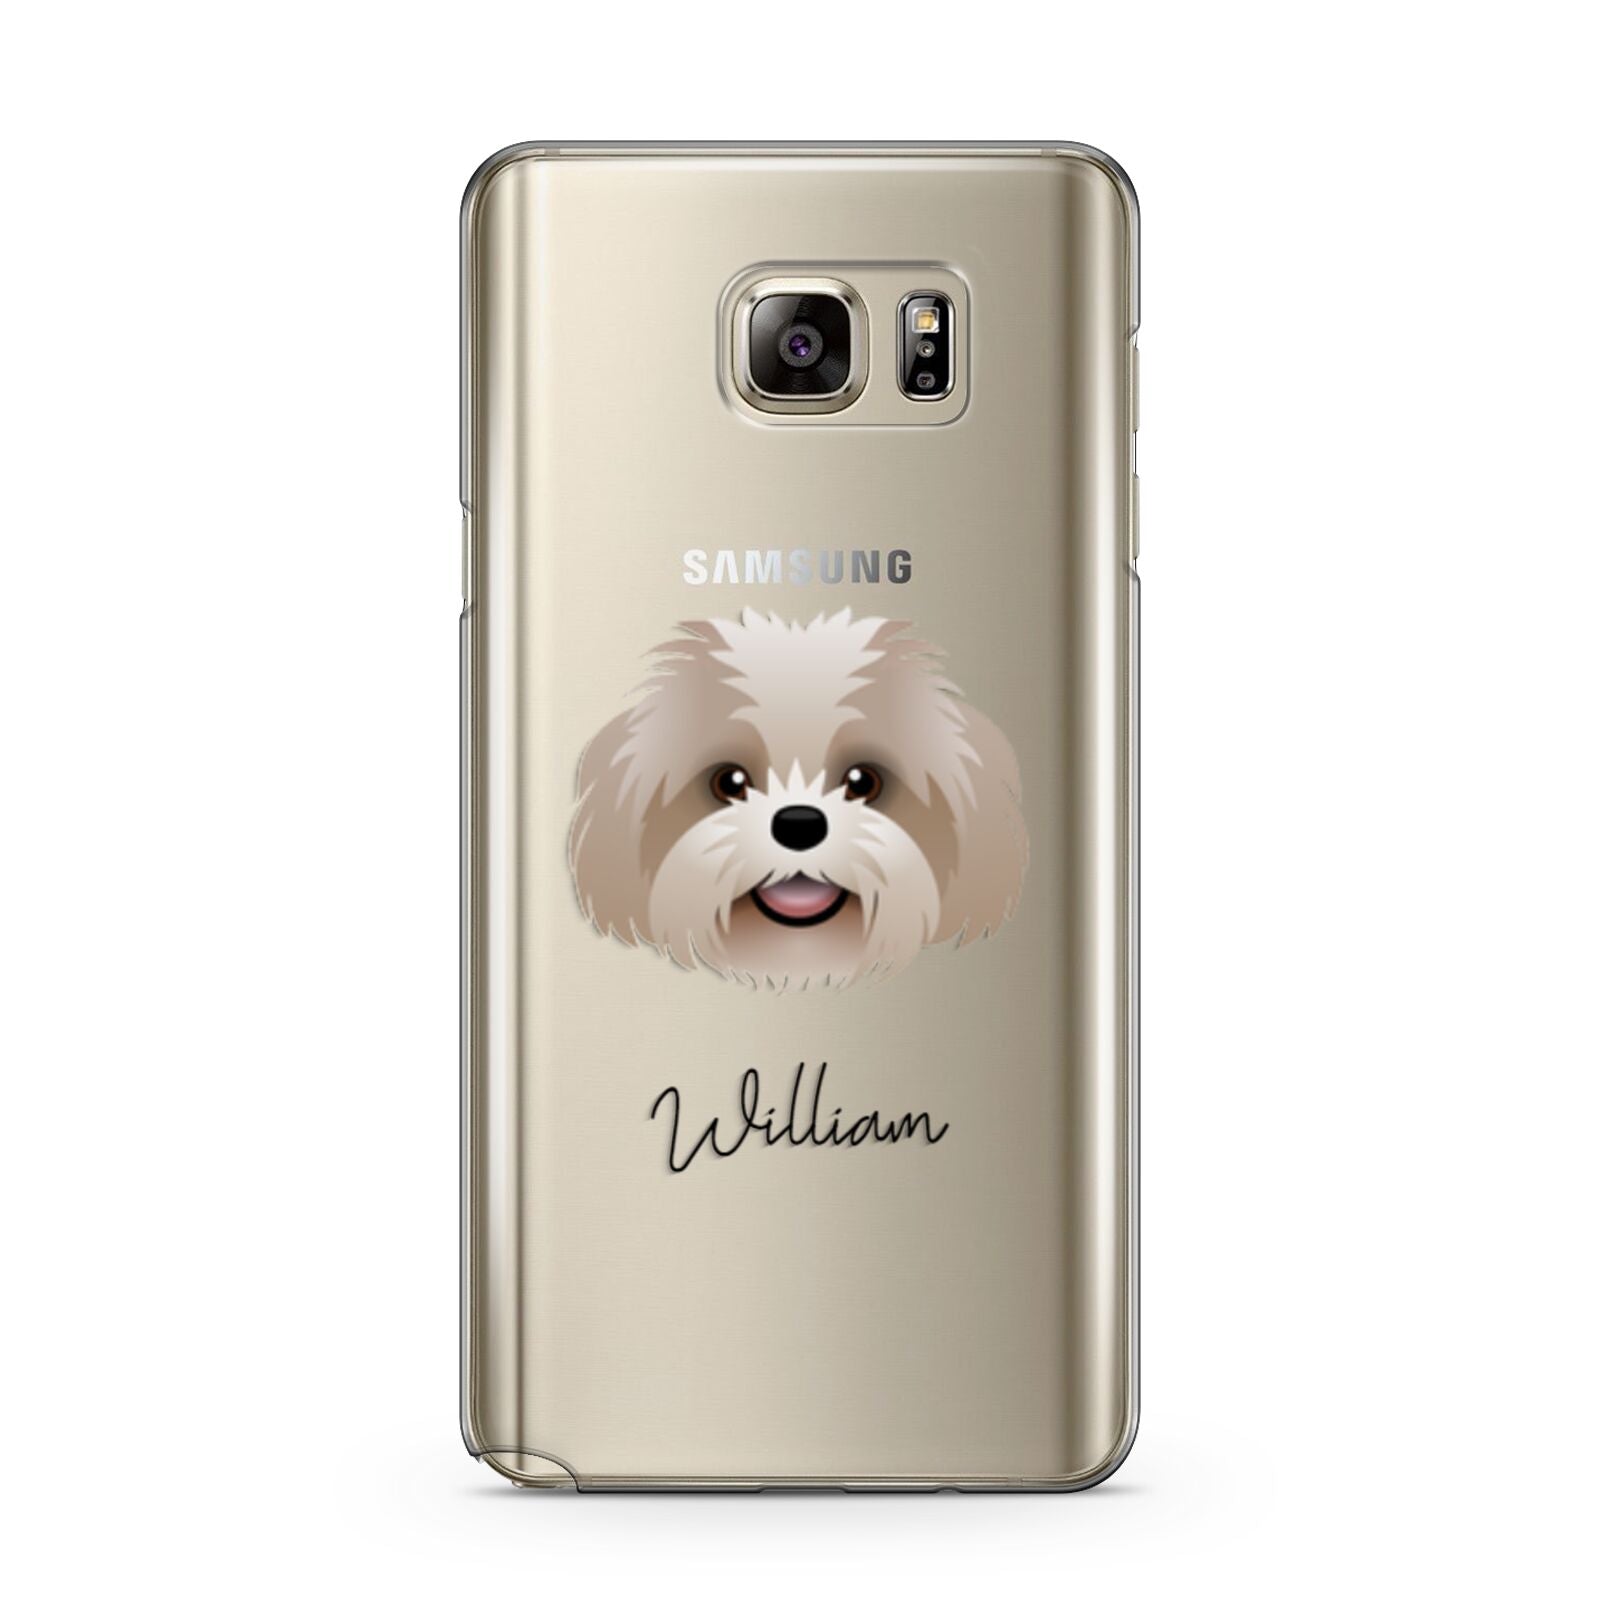 Shih Poo Personalised Samsung Galaxy Note 5 Case